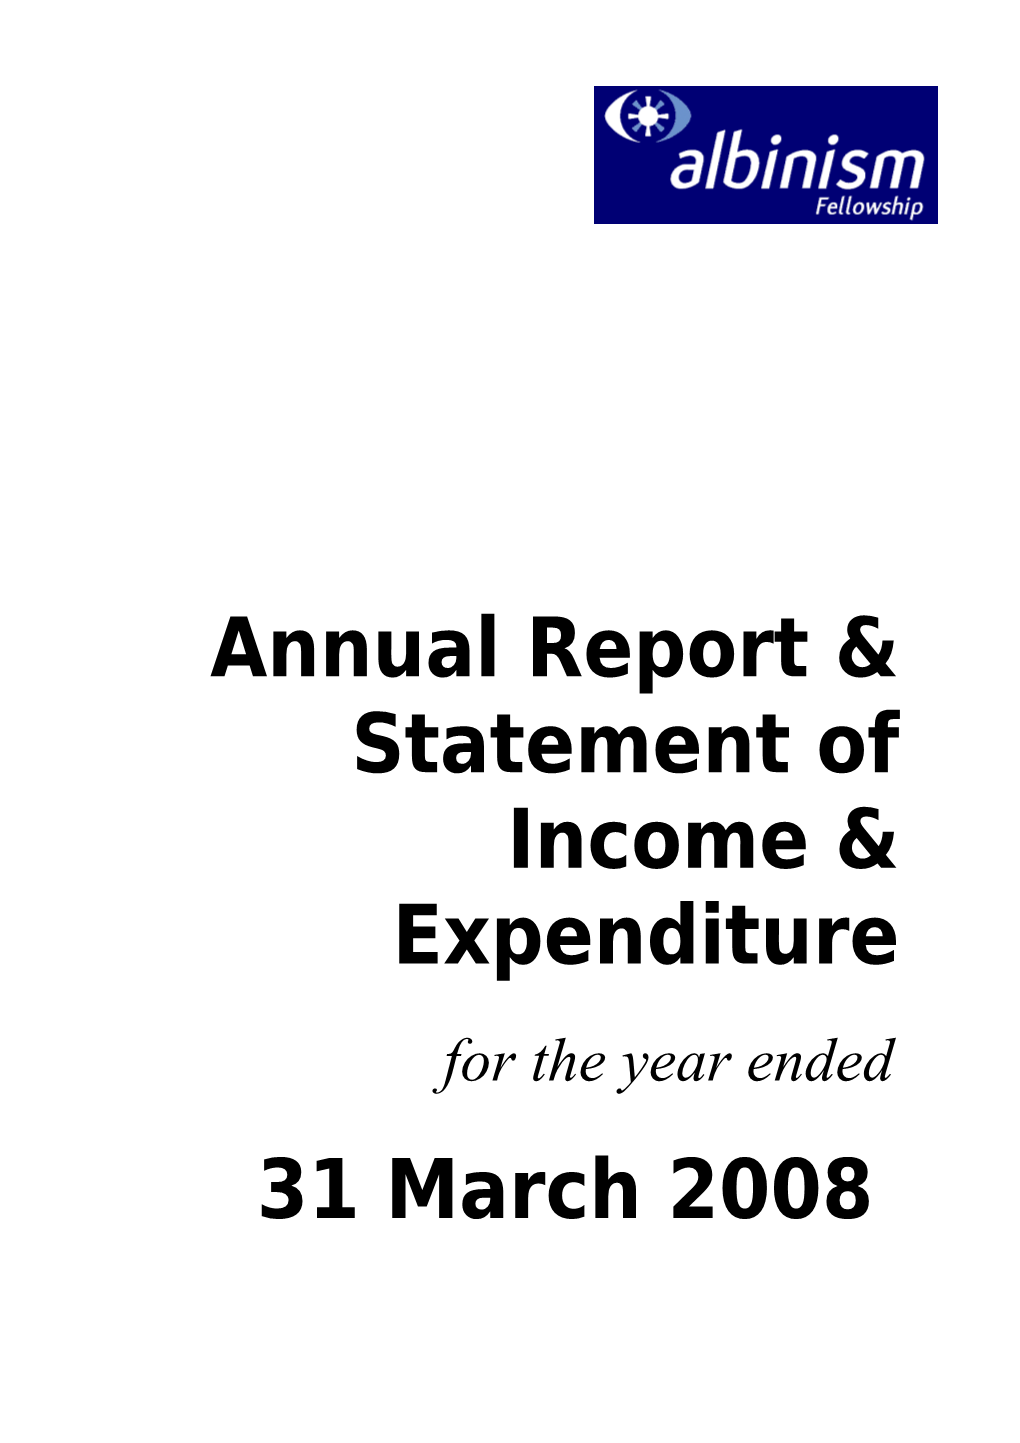 Annual Report & Statement of Income & Expenditure